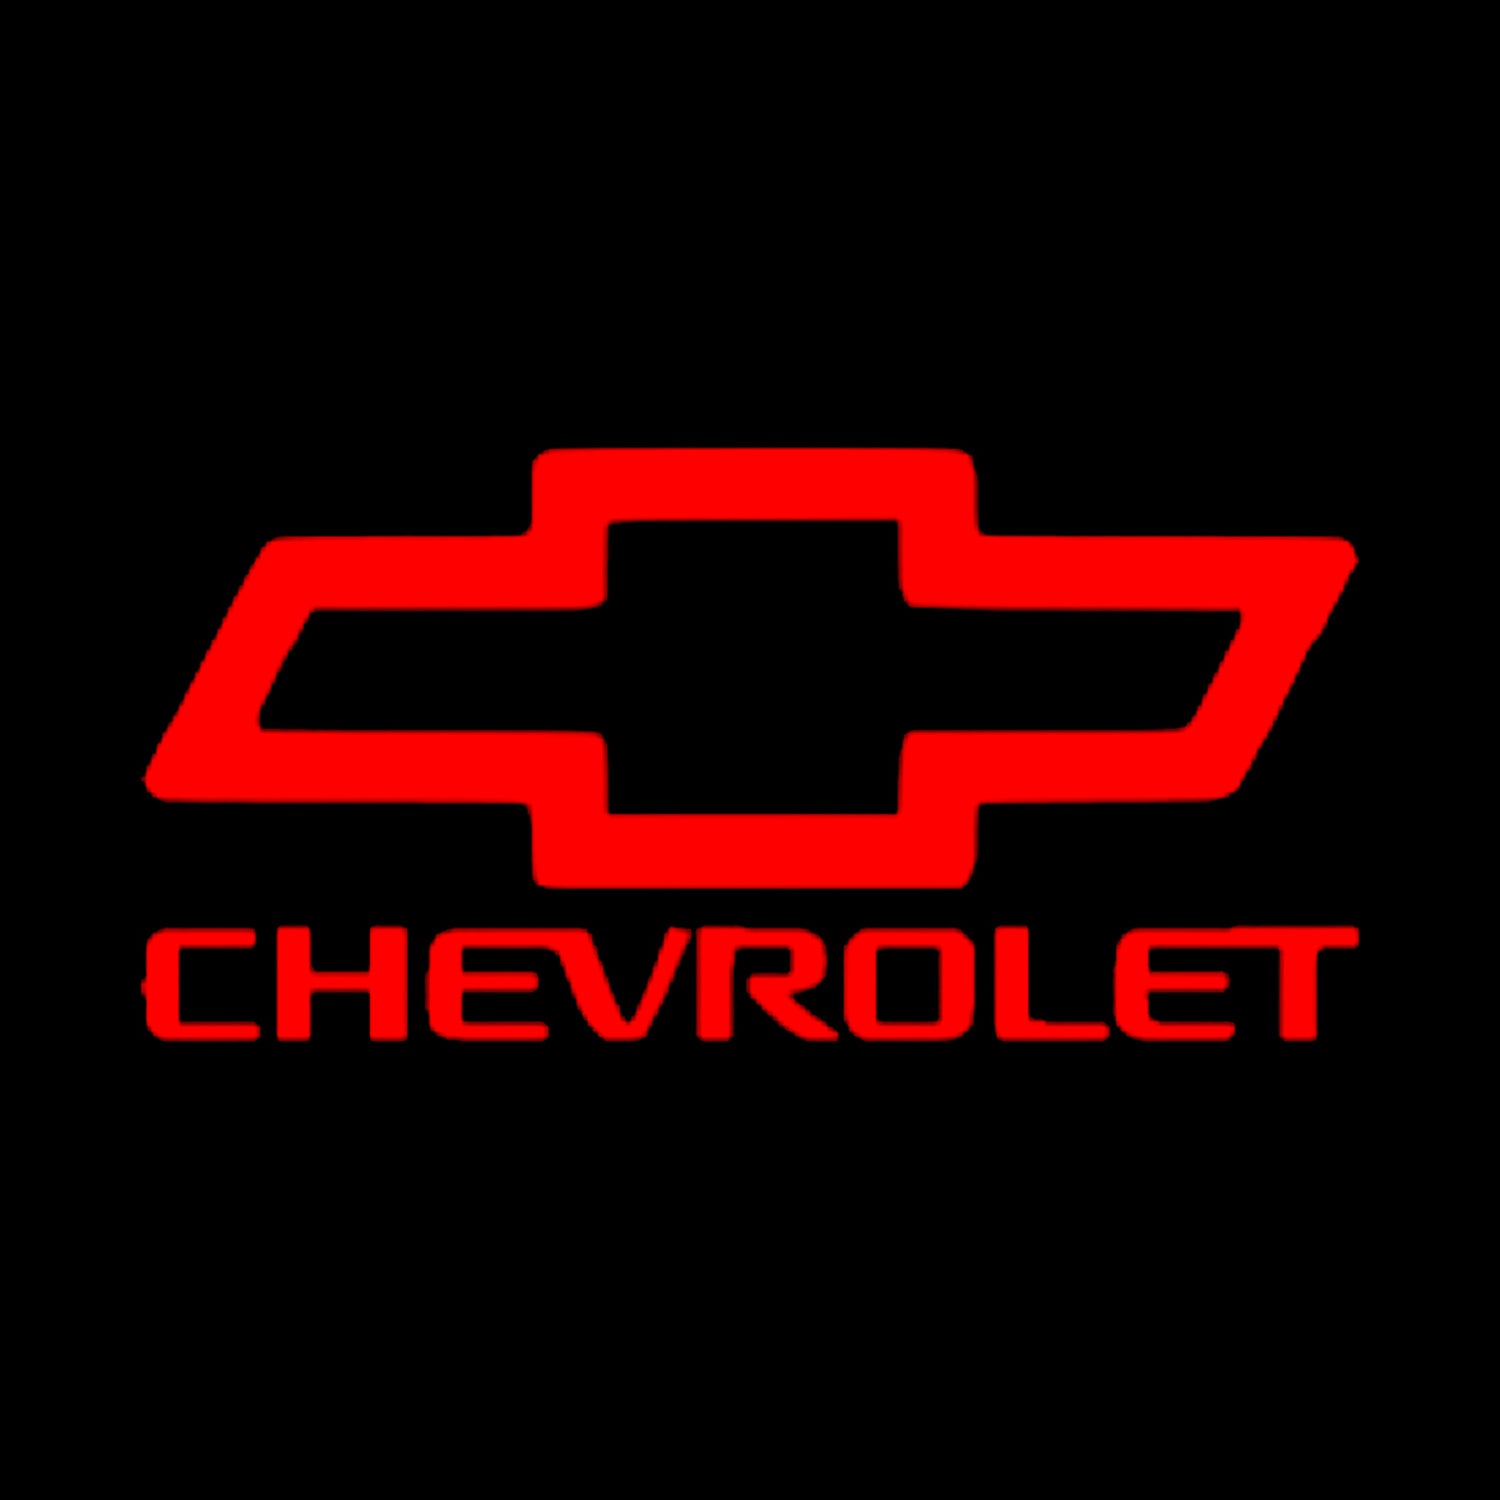 Chevrolet logo in red with black background